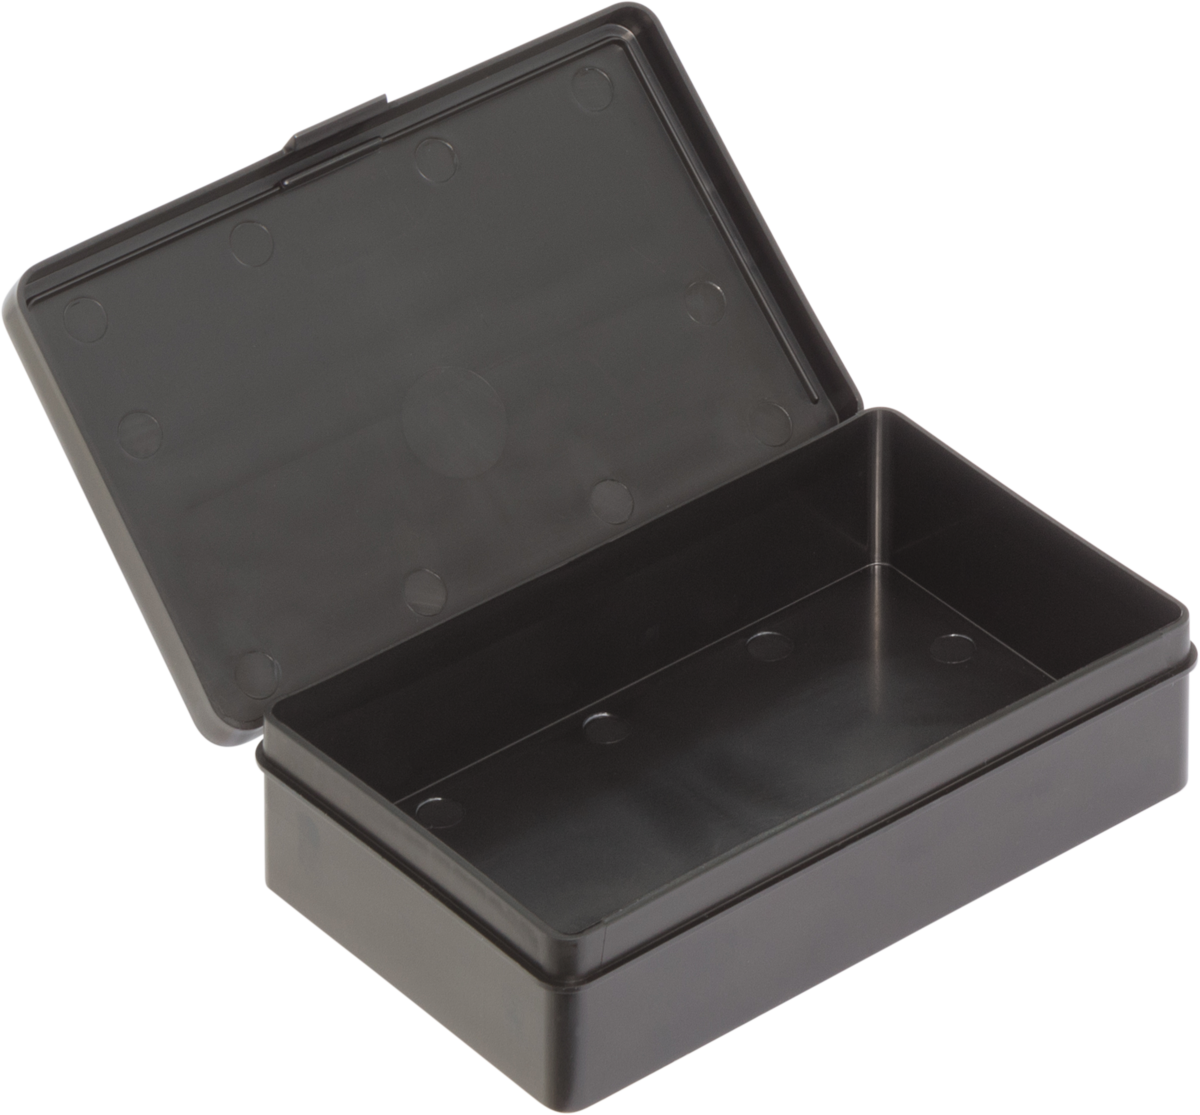 Anti-Static-ESD-Antistatic-Lidded-Box-with-Hinged-Lid-H35mm-flat-base_Ref.-1308.030.992_1004152_136x87x35_01_open